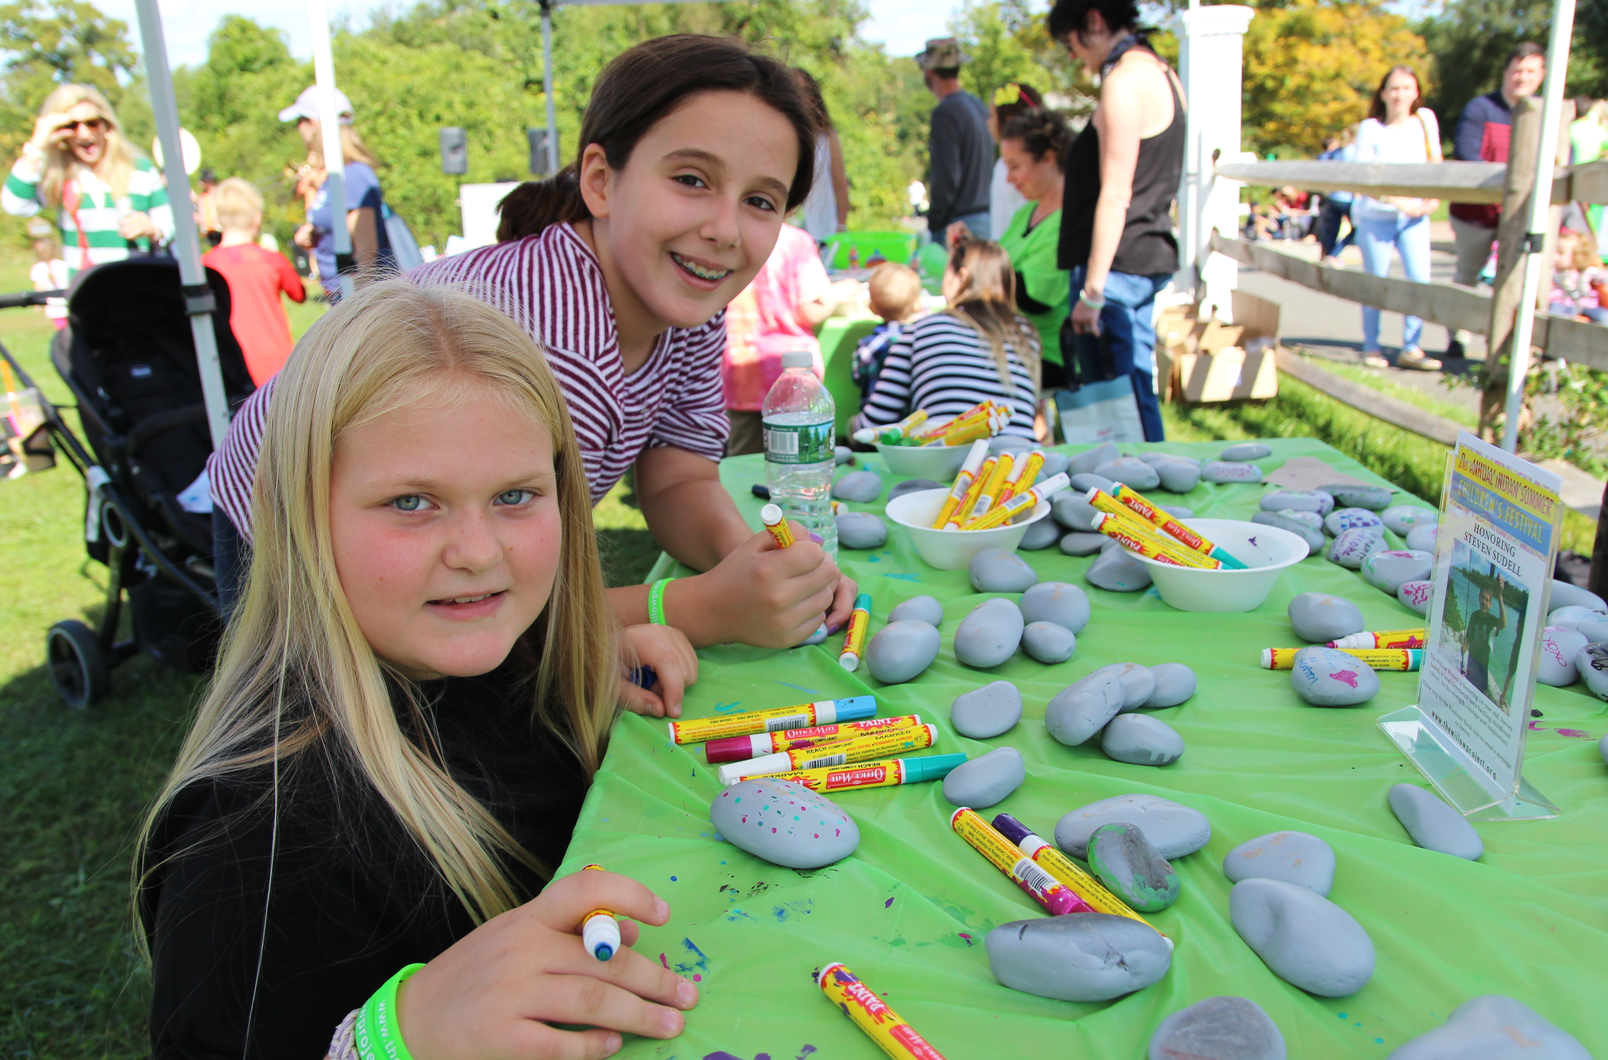 Painting kindness rocks at the Indian Summer Children's Festival, Sept. 30, 2018 Photo: Leslie Yager